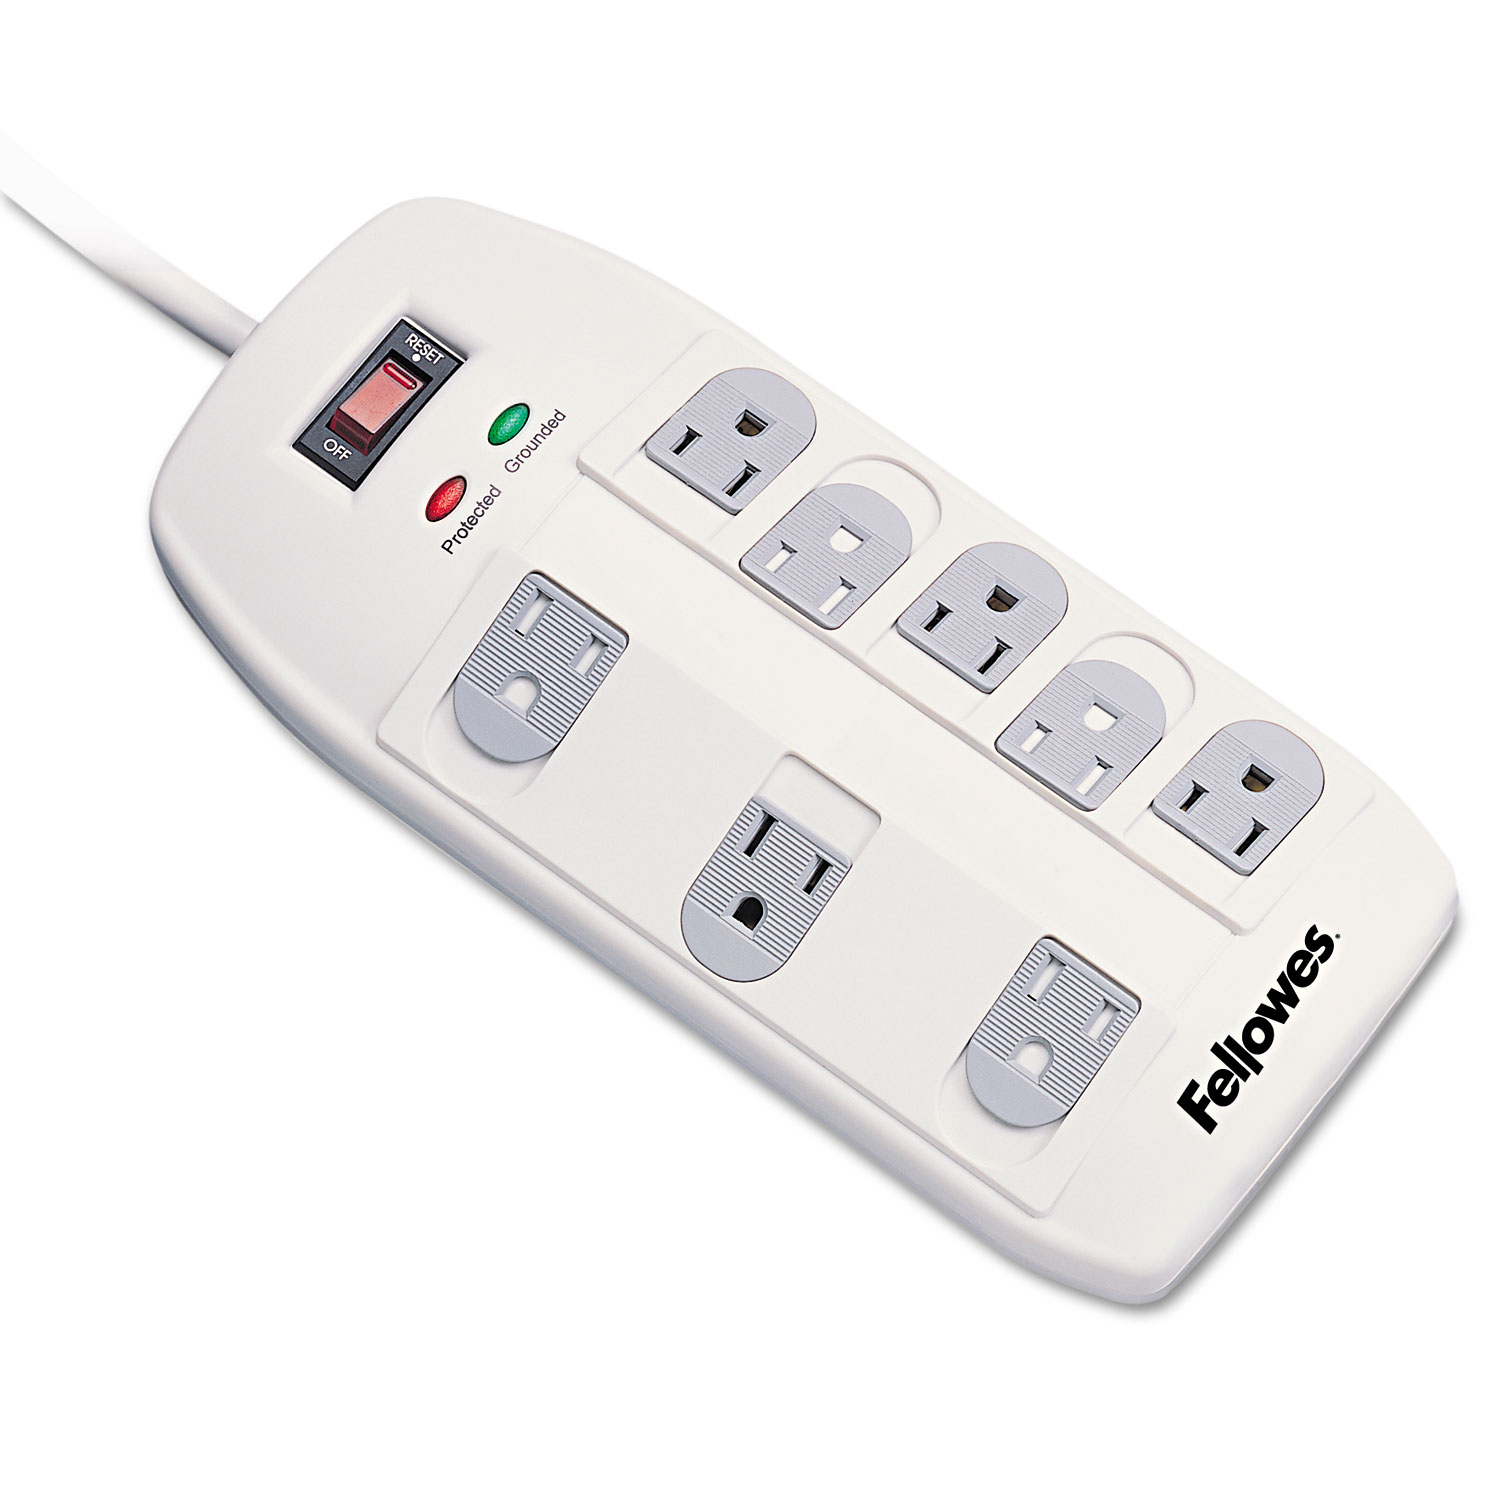  Fellowes 99015 Superior Workstation Surge Protector, 8 Outlets, 6 ft Cord, 2160 Joules (FEL99015) 